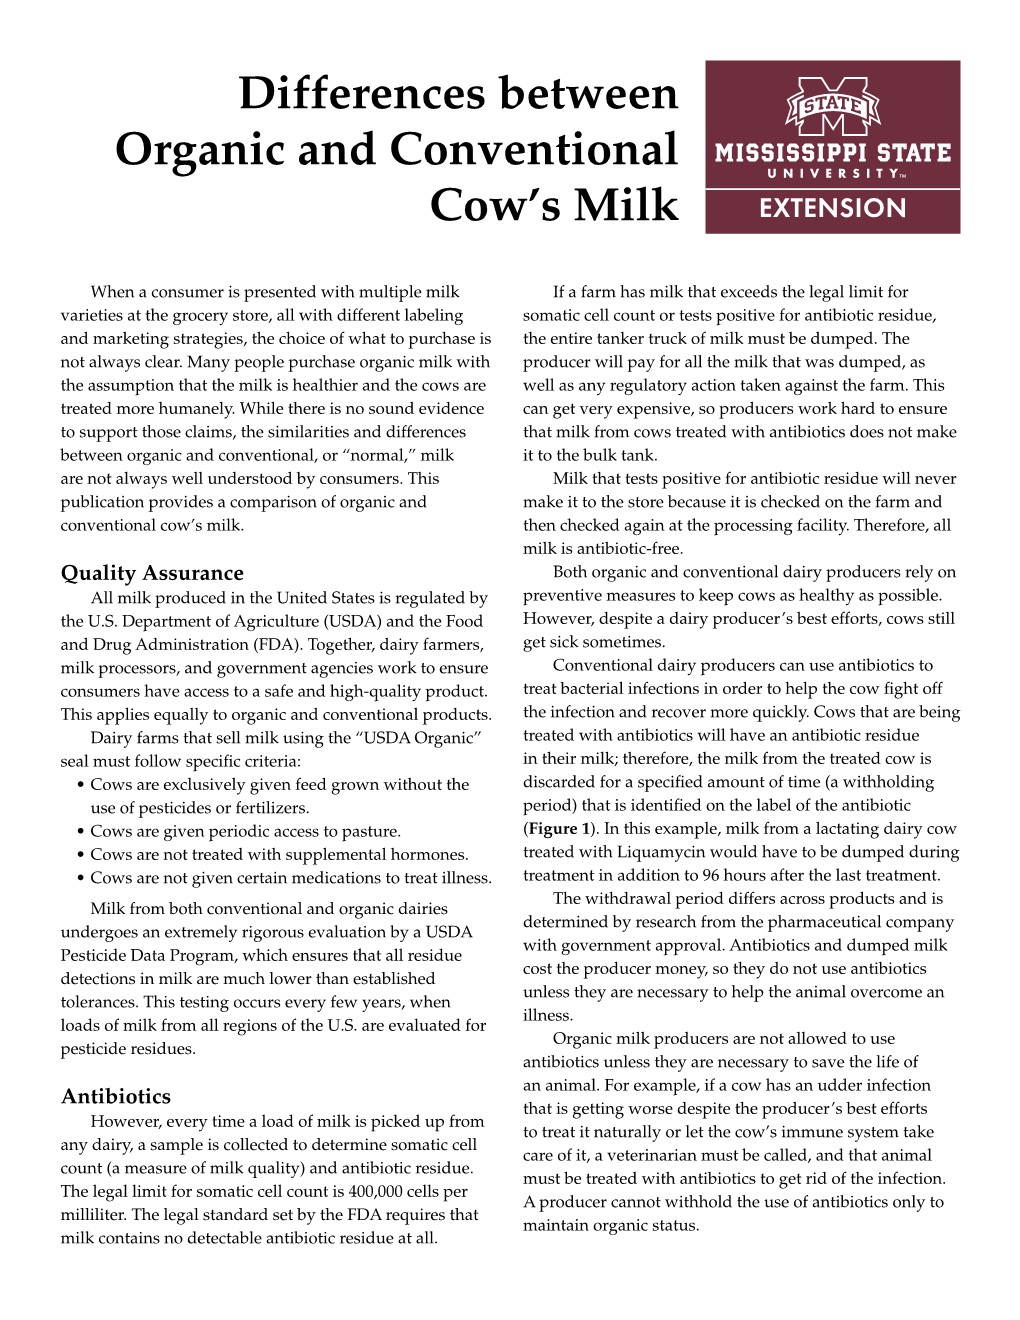 Differences Between Organic and Conventional Cow's Milk